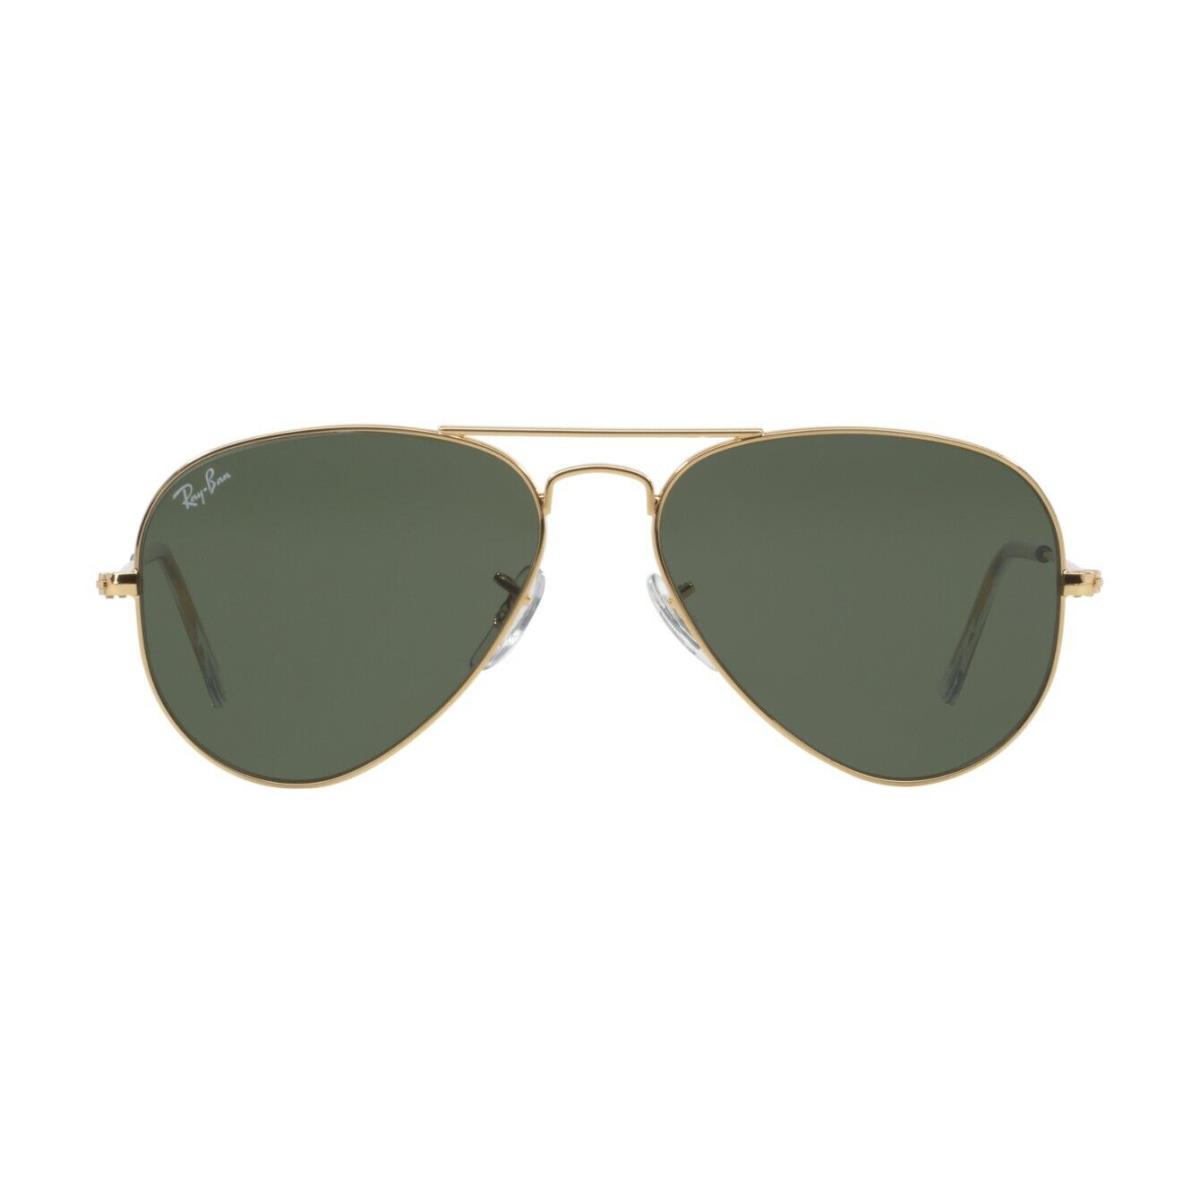 Ray-ban Aviator Large Metal RB 3025 Gold/G-15 Classic Green W3234 Sunglasses